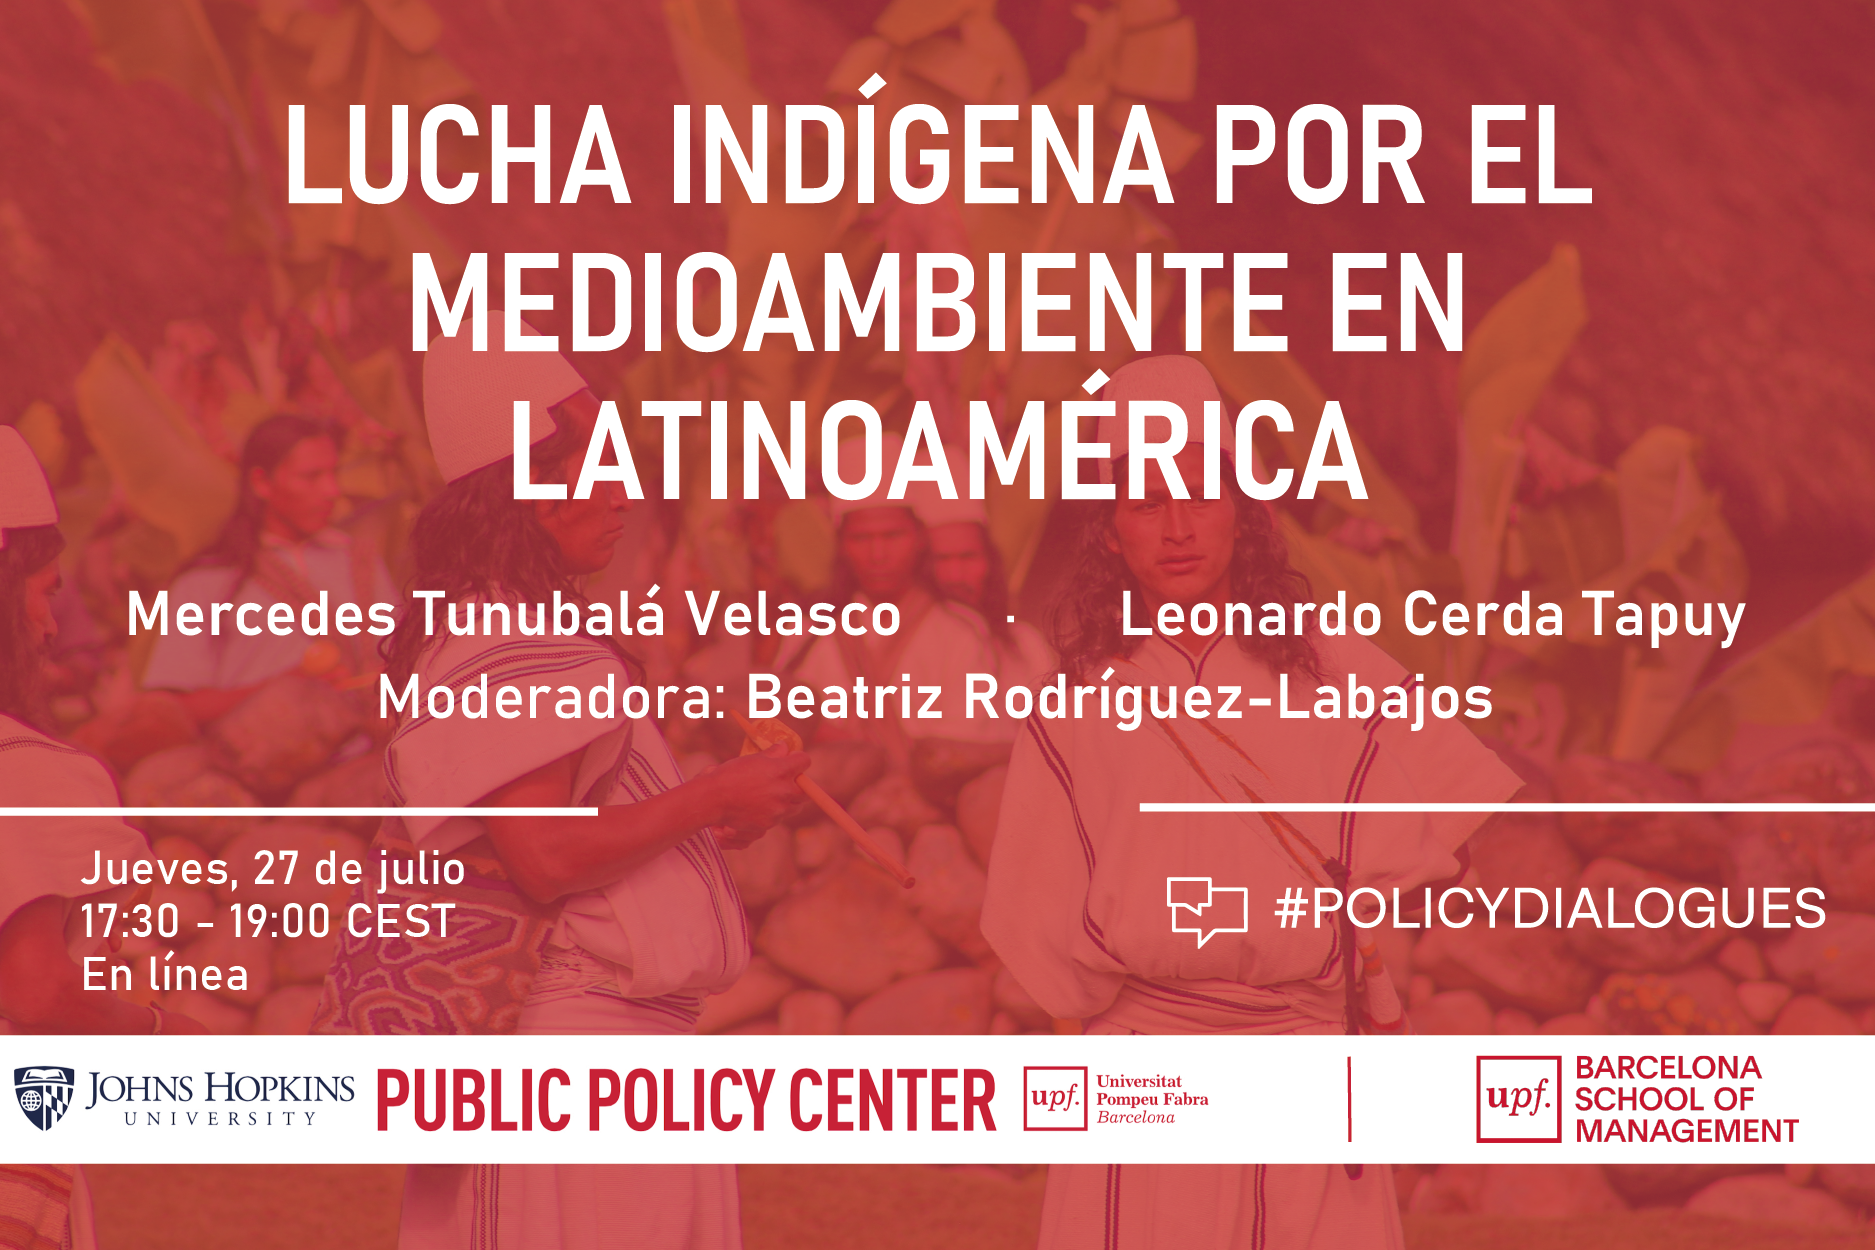 Next Policy Dialogues: The Indigenous Struggle for the Environment in Latin America